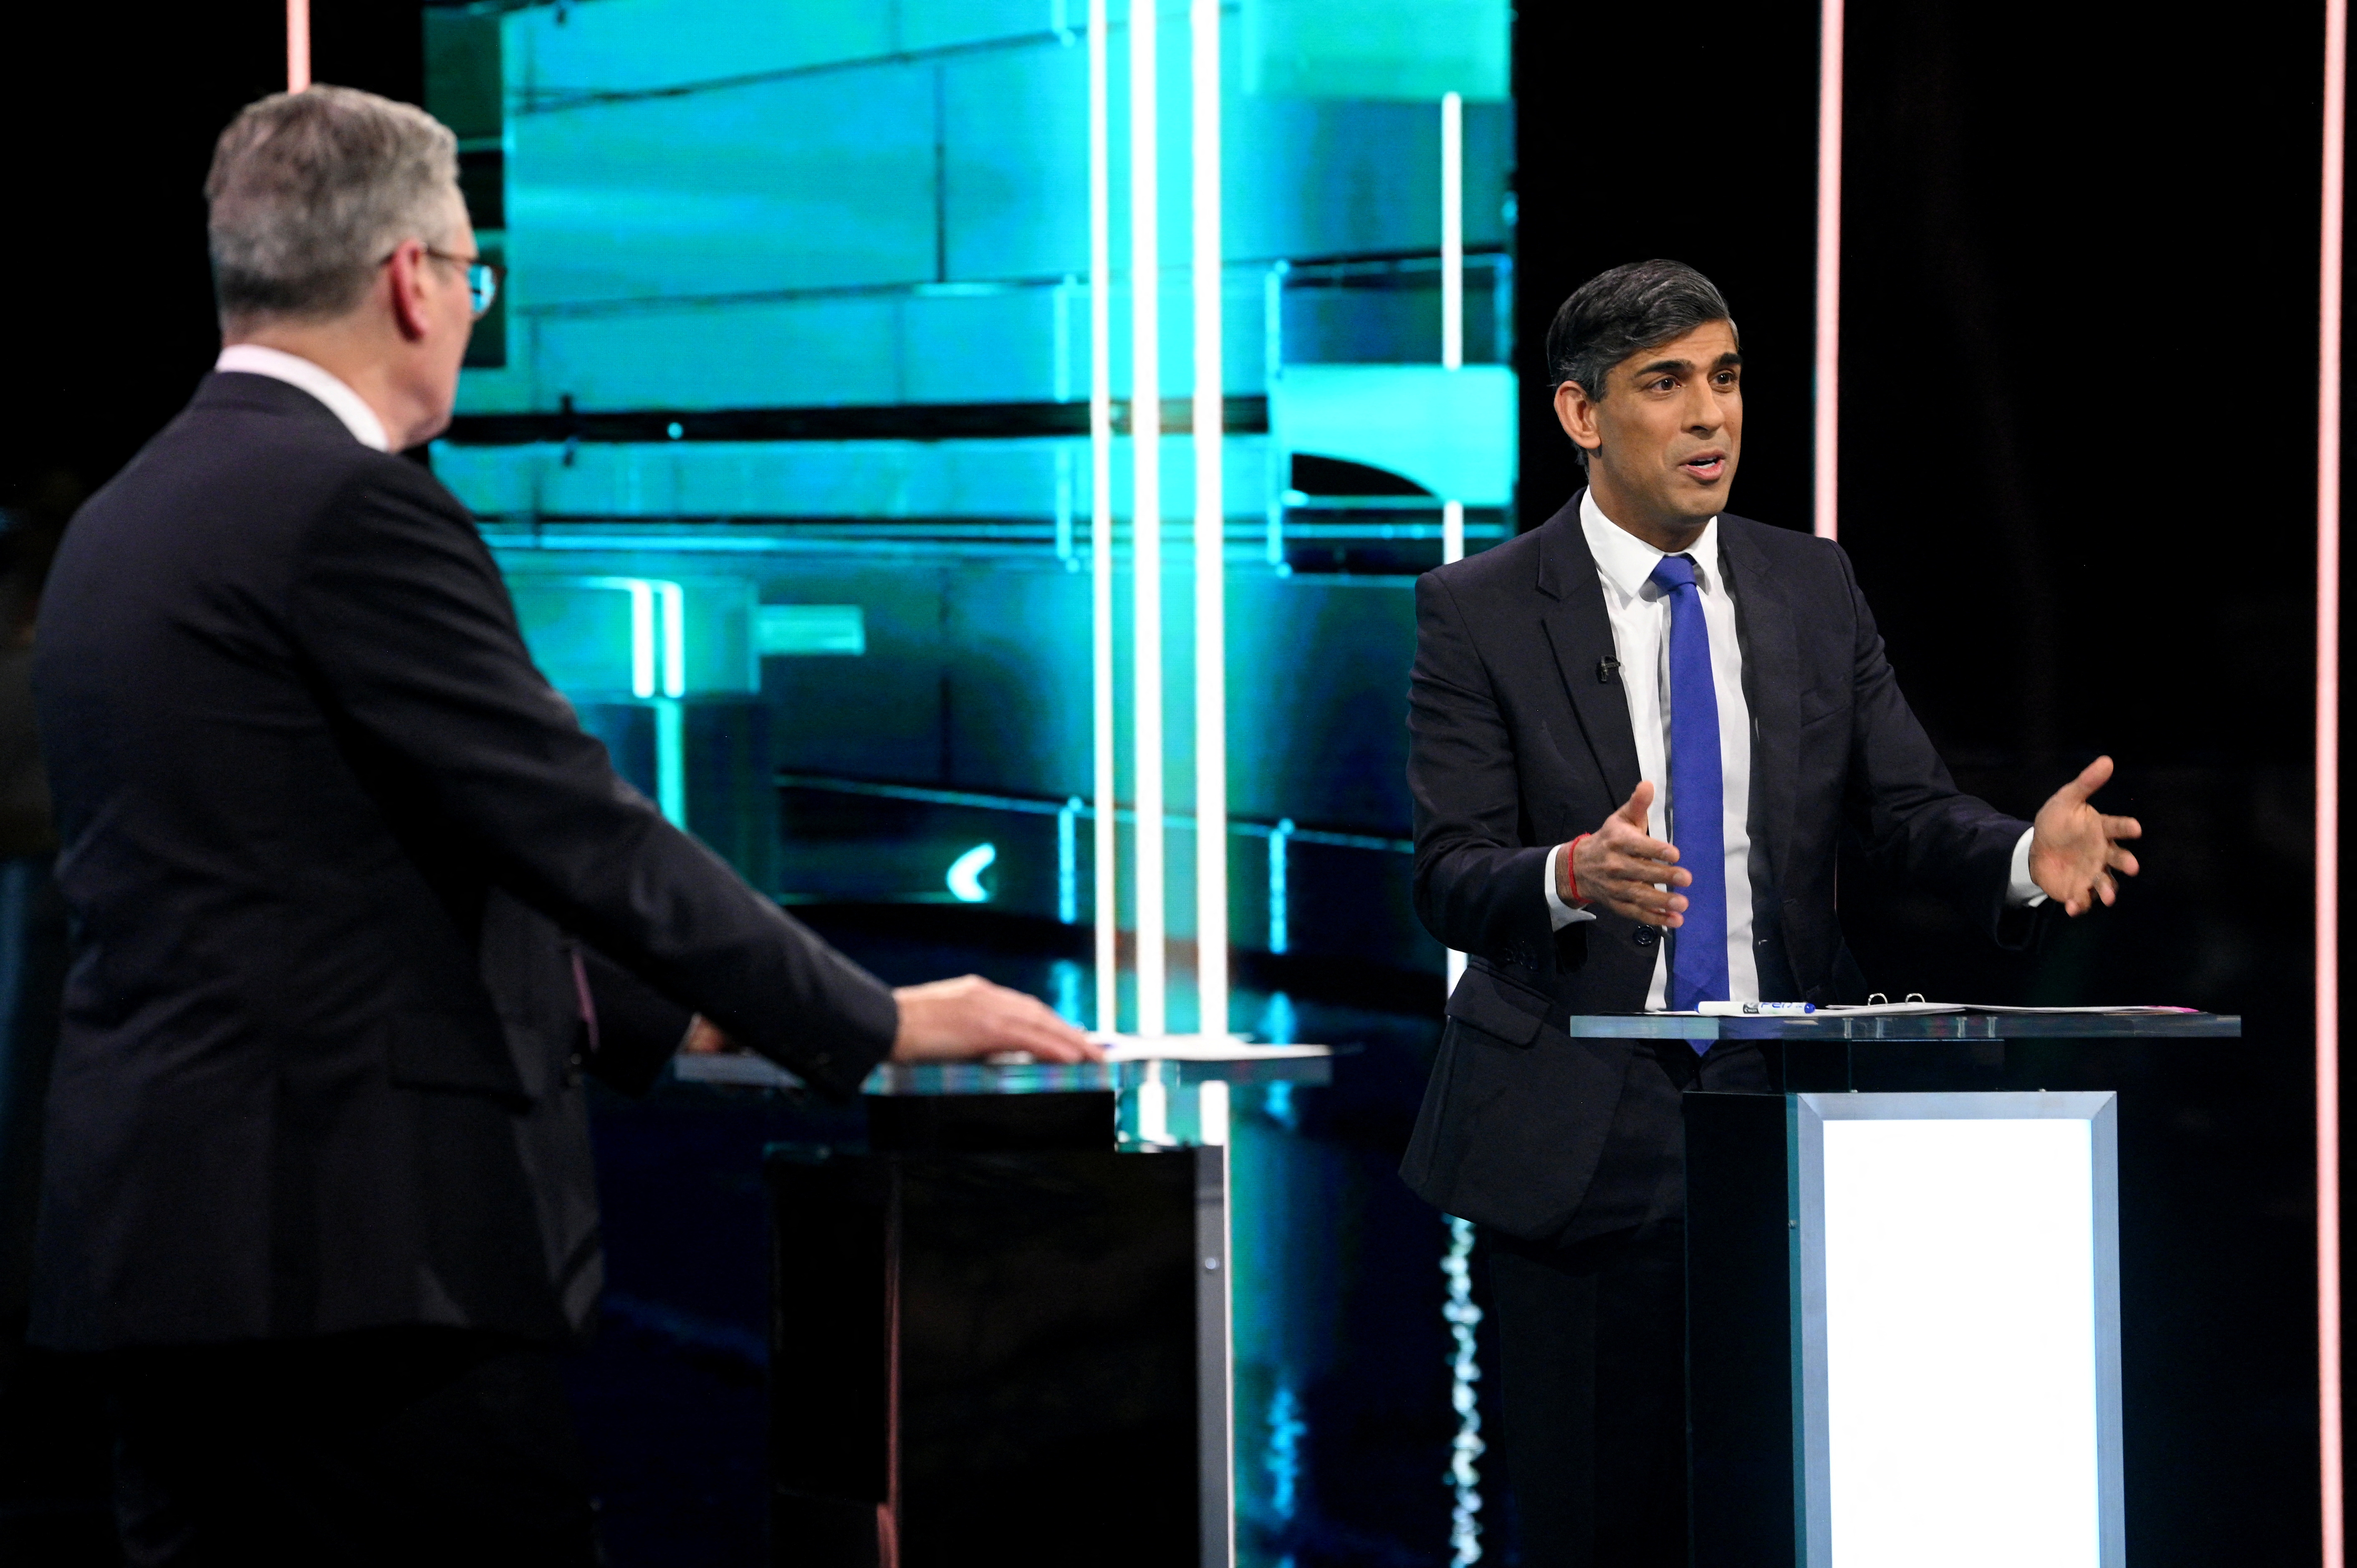 Labour Party leader Keir Starmer and Prime Minister and Conservative Party leader Rishi Sunak debate, in Manchester